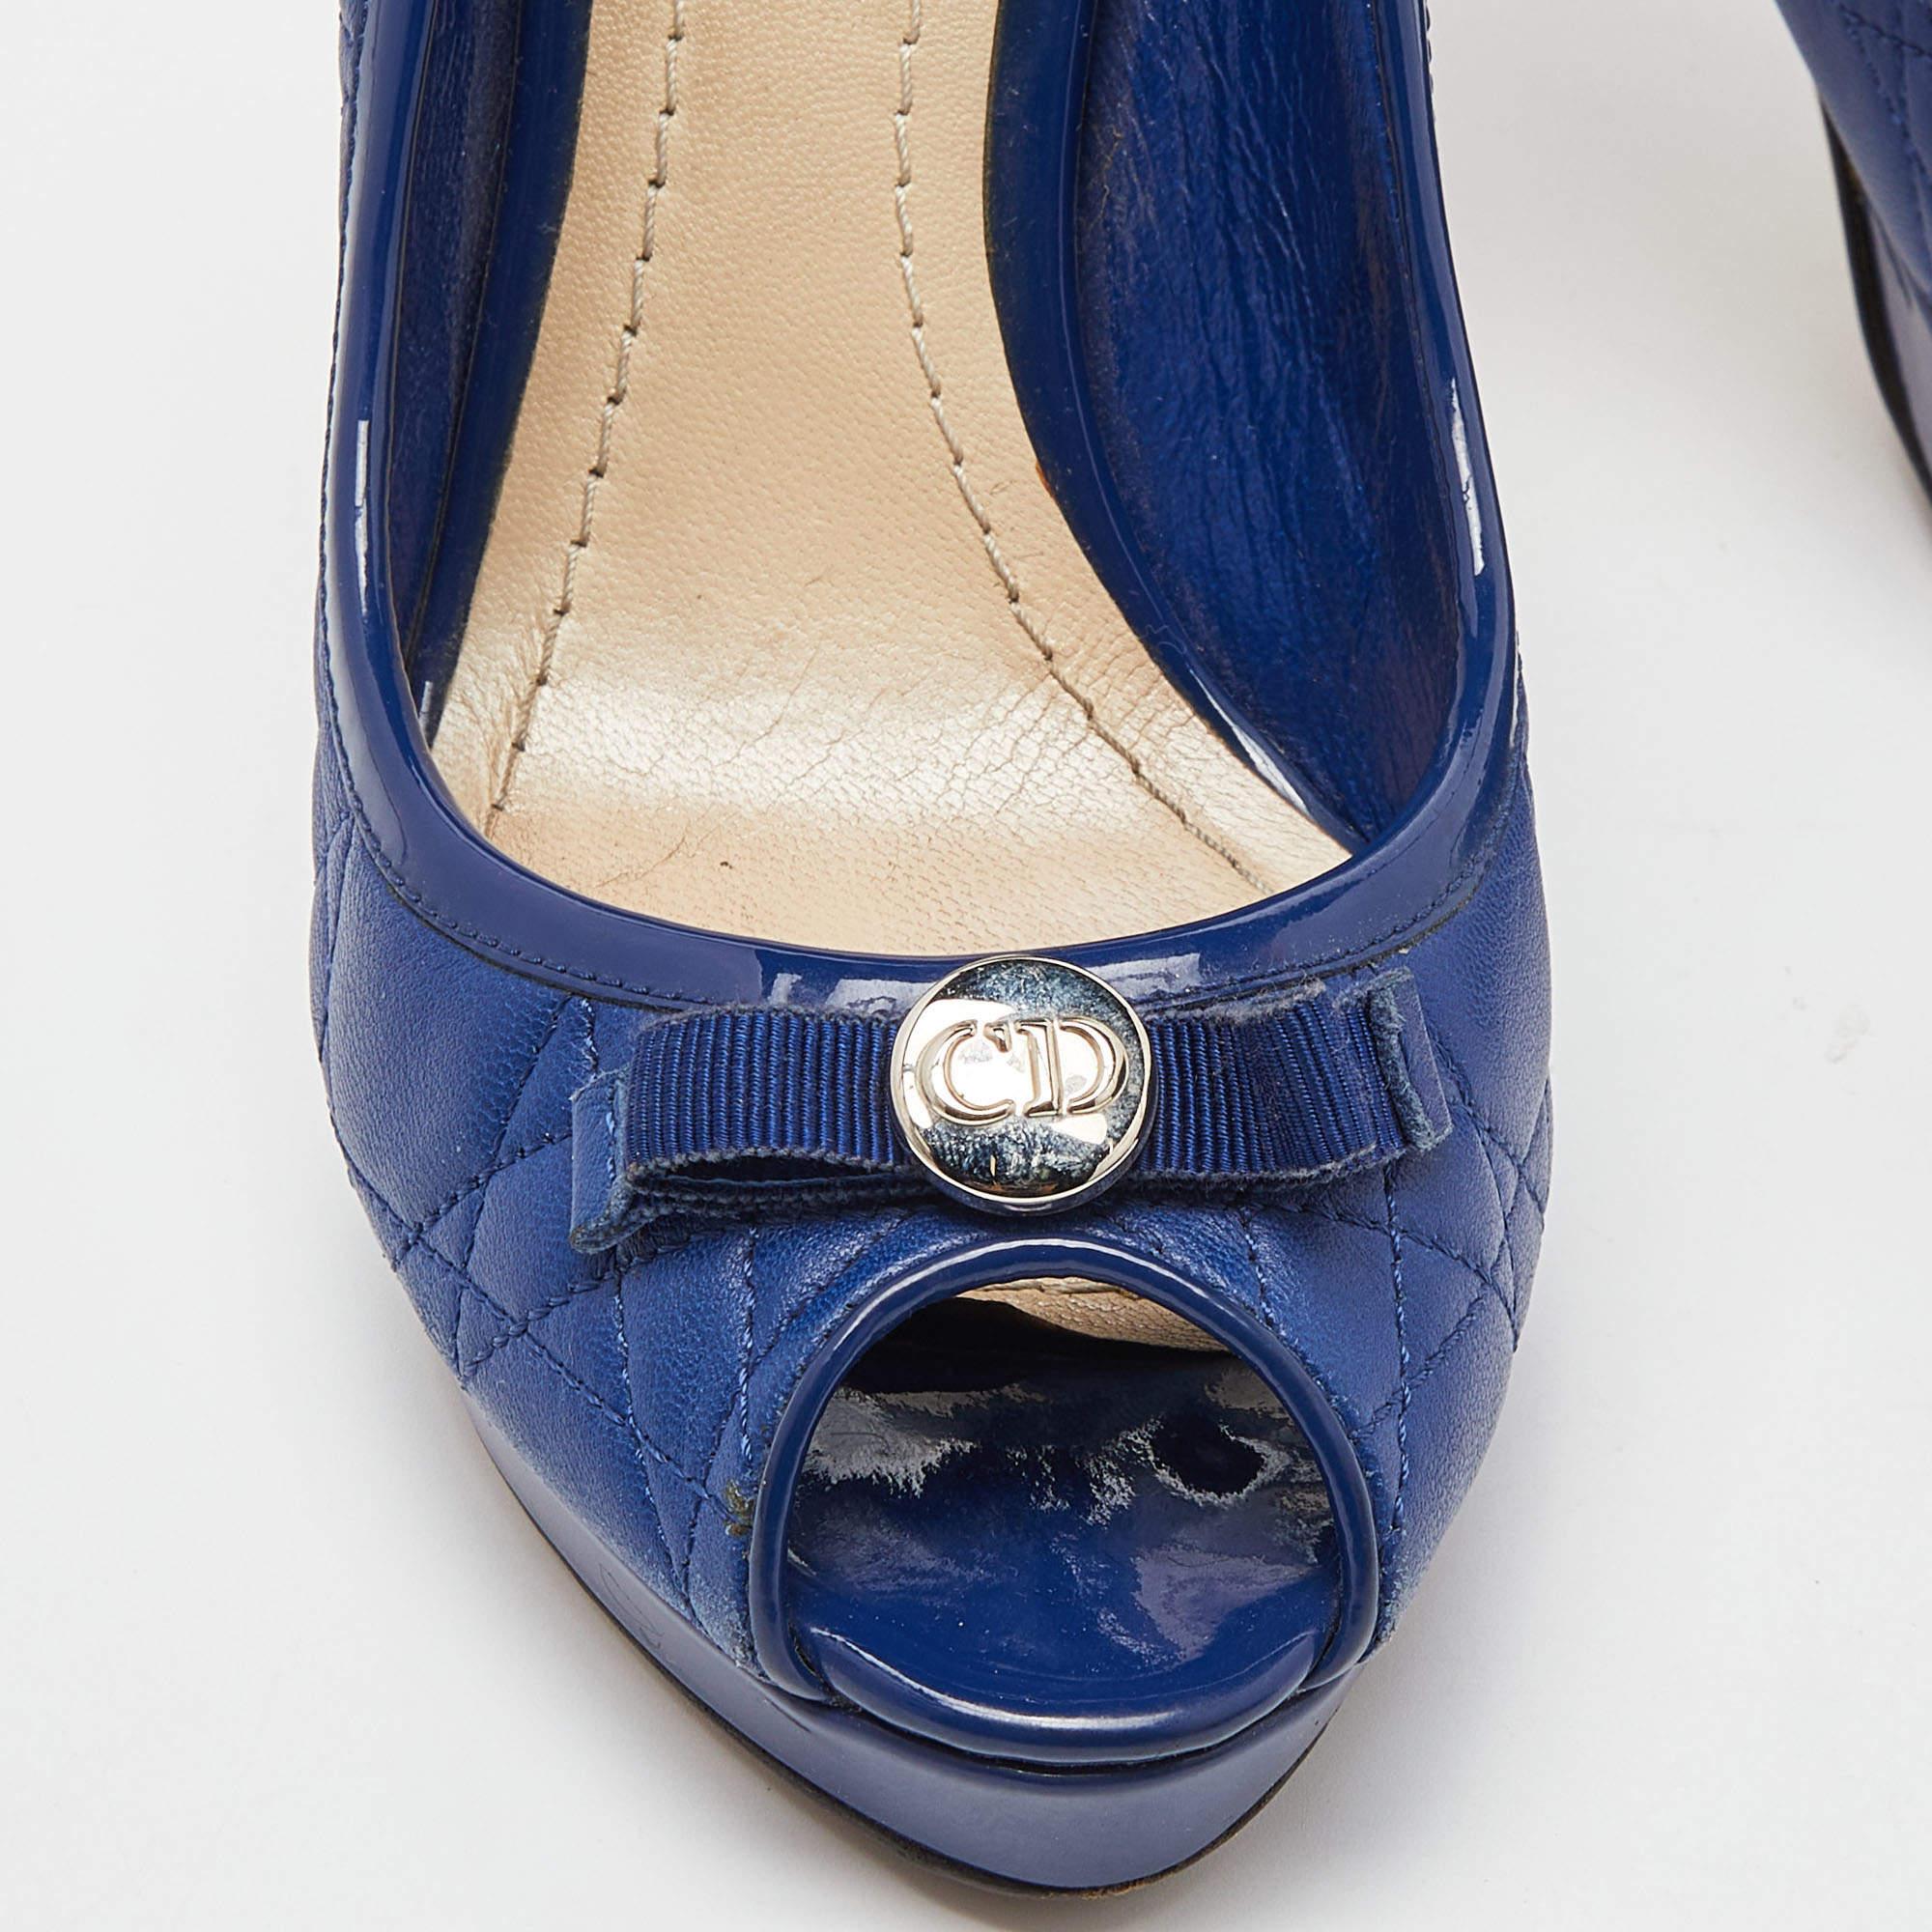 Dior Blue Cannage Leather and Patent Bow Peep Toe Platform Pumps Size 36.5 For Sale 4